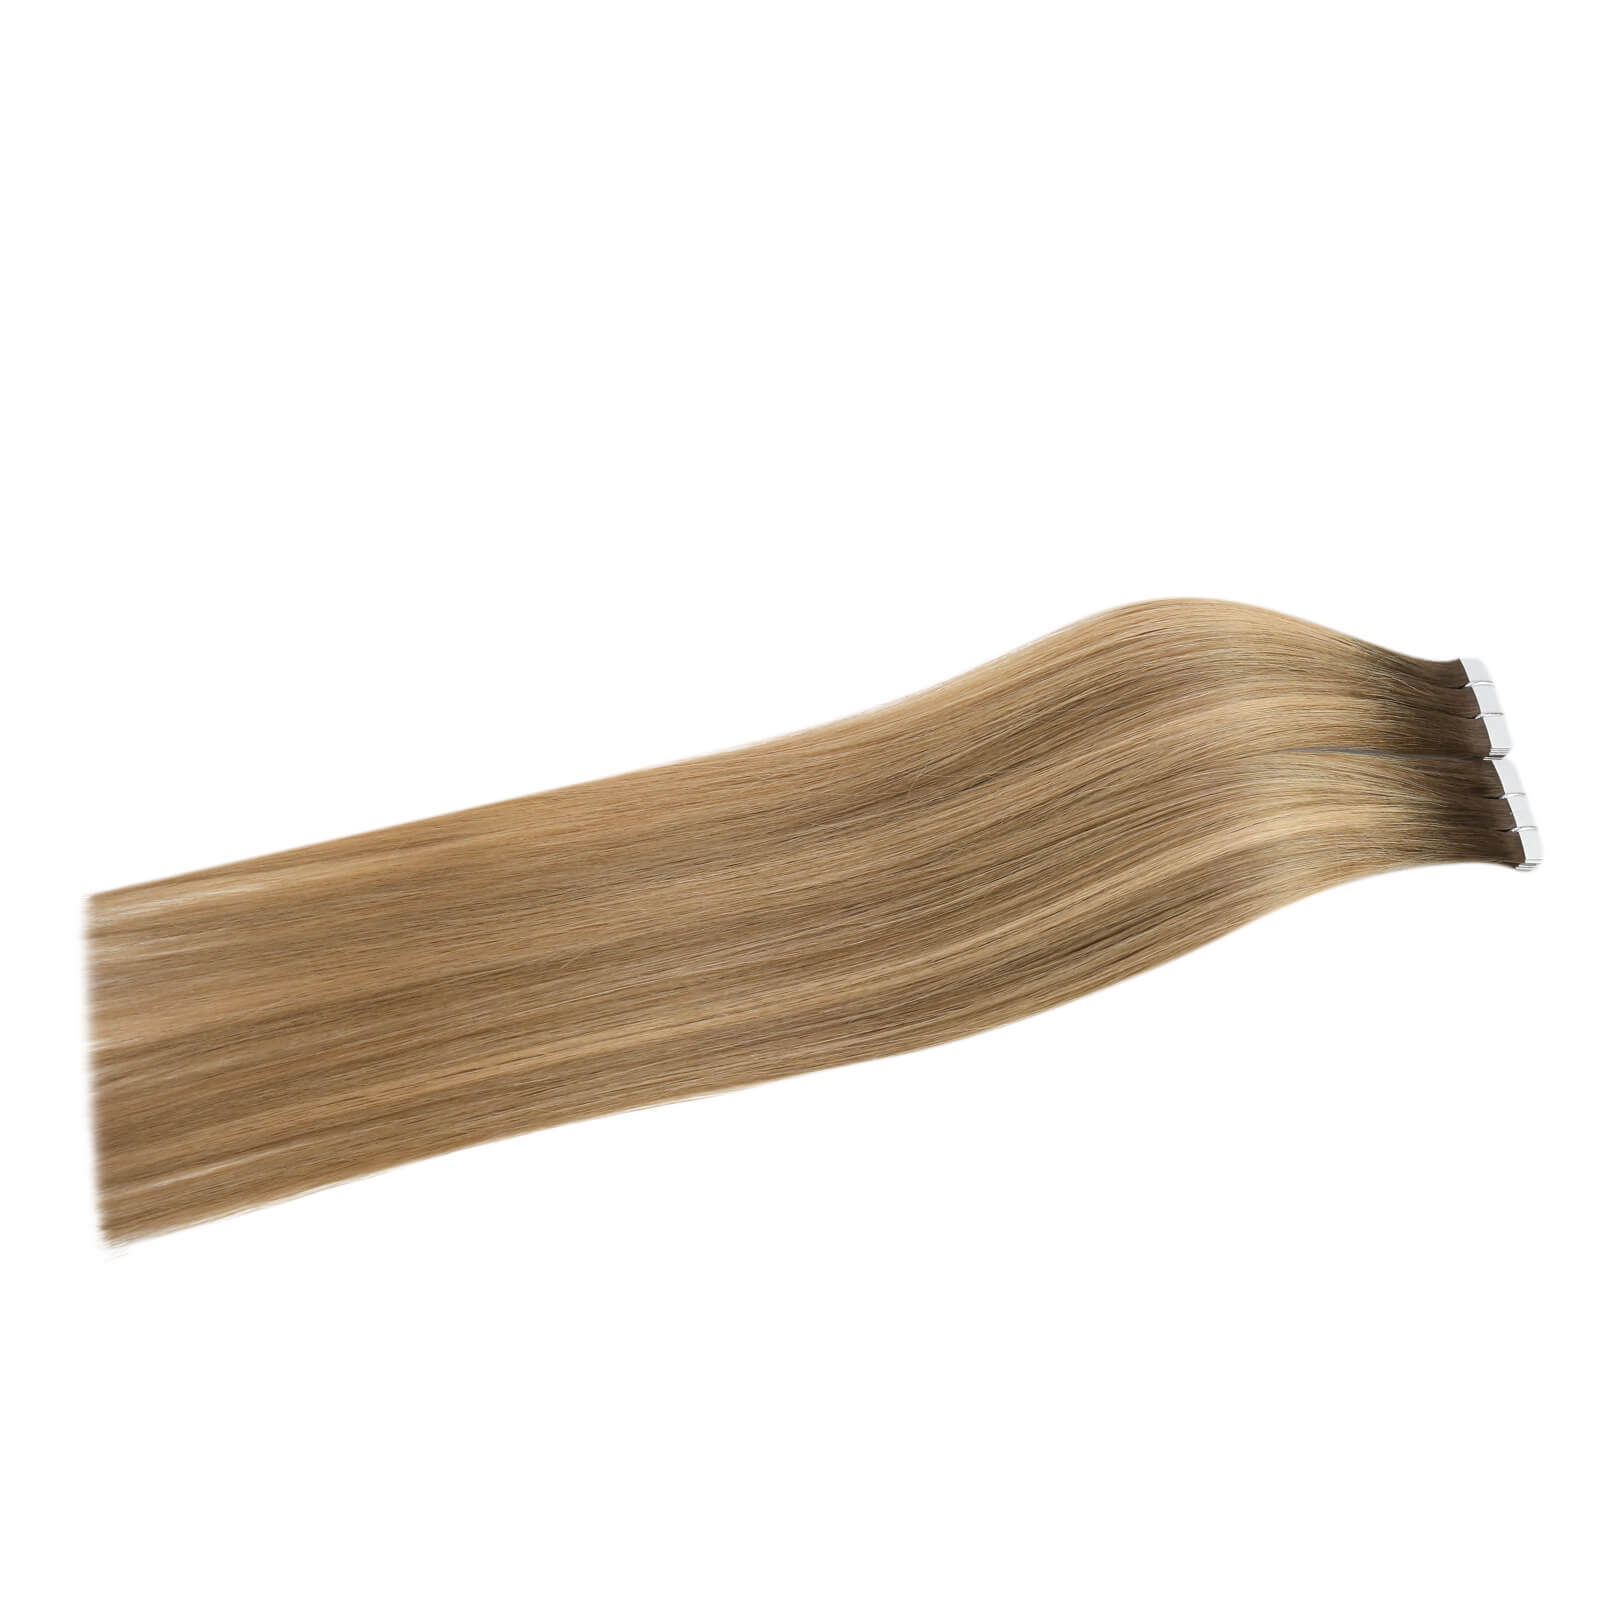 tape in extensions human hair, tape in human hair extensions, tape in hair extensions human hair, tape hair extensions,